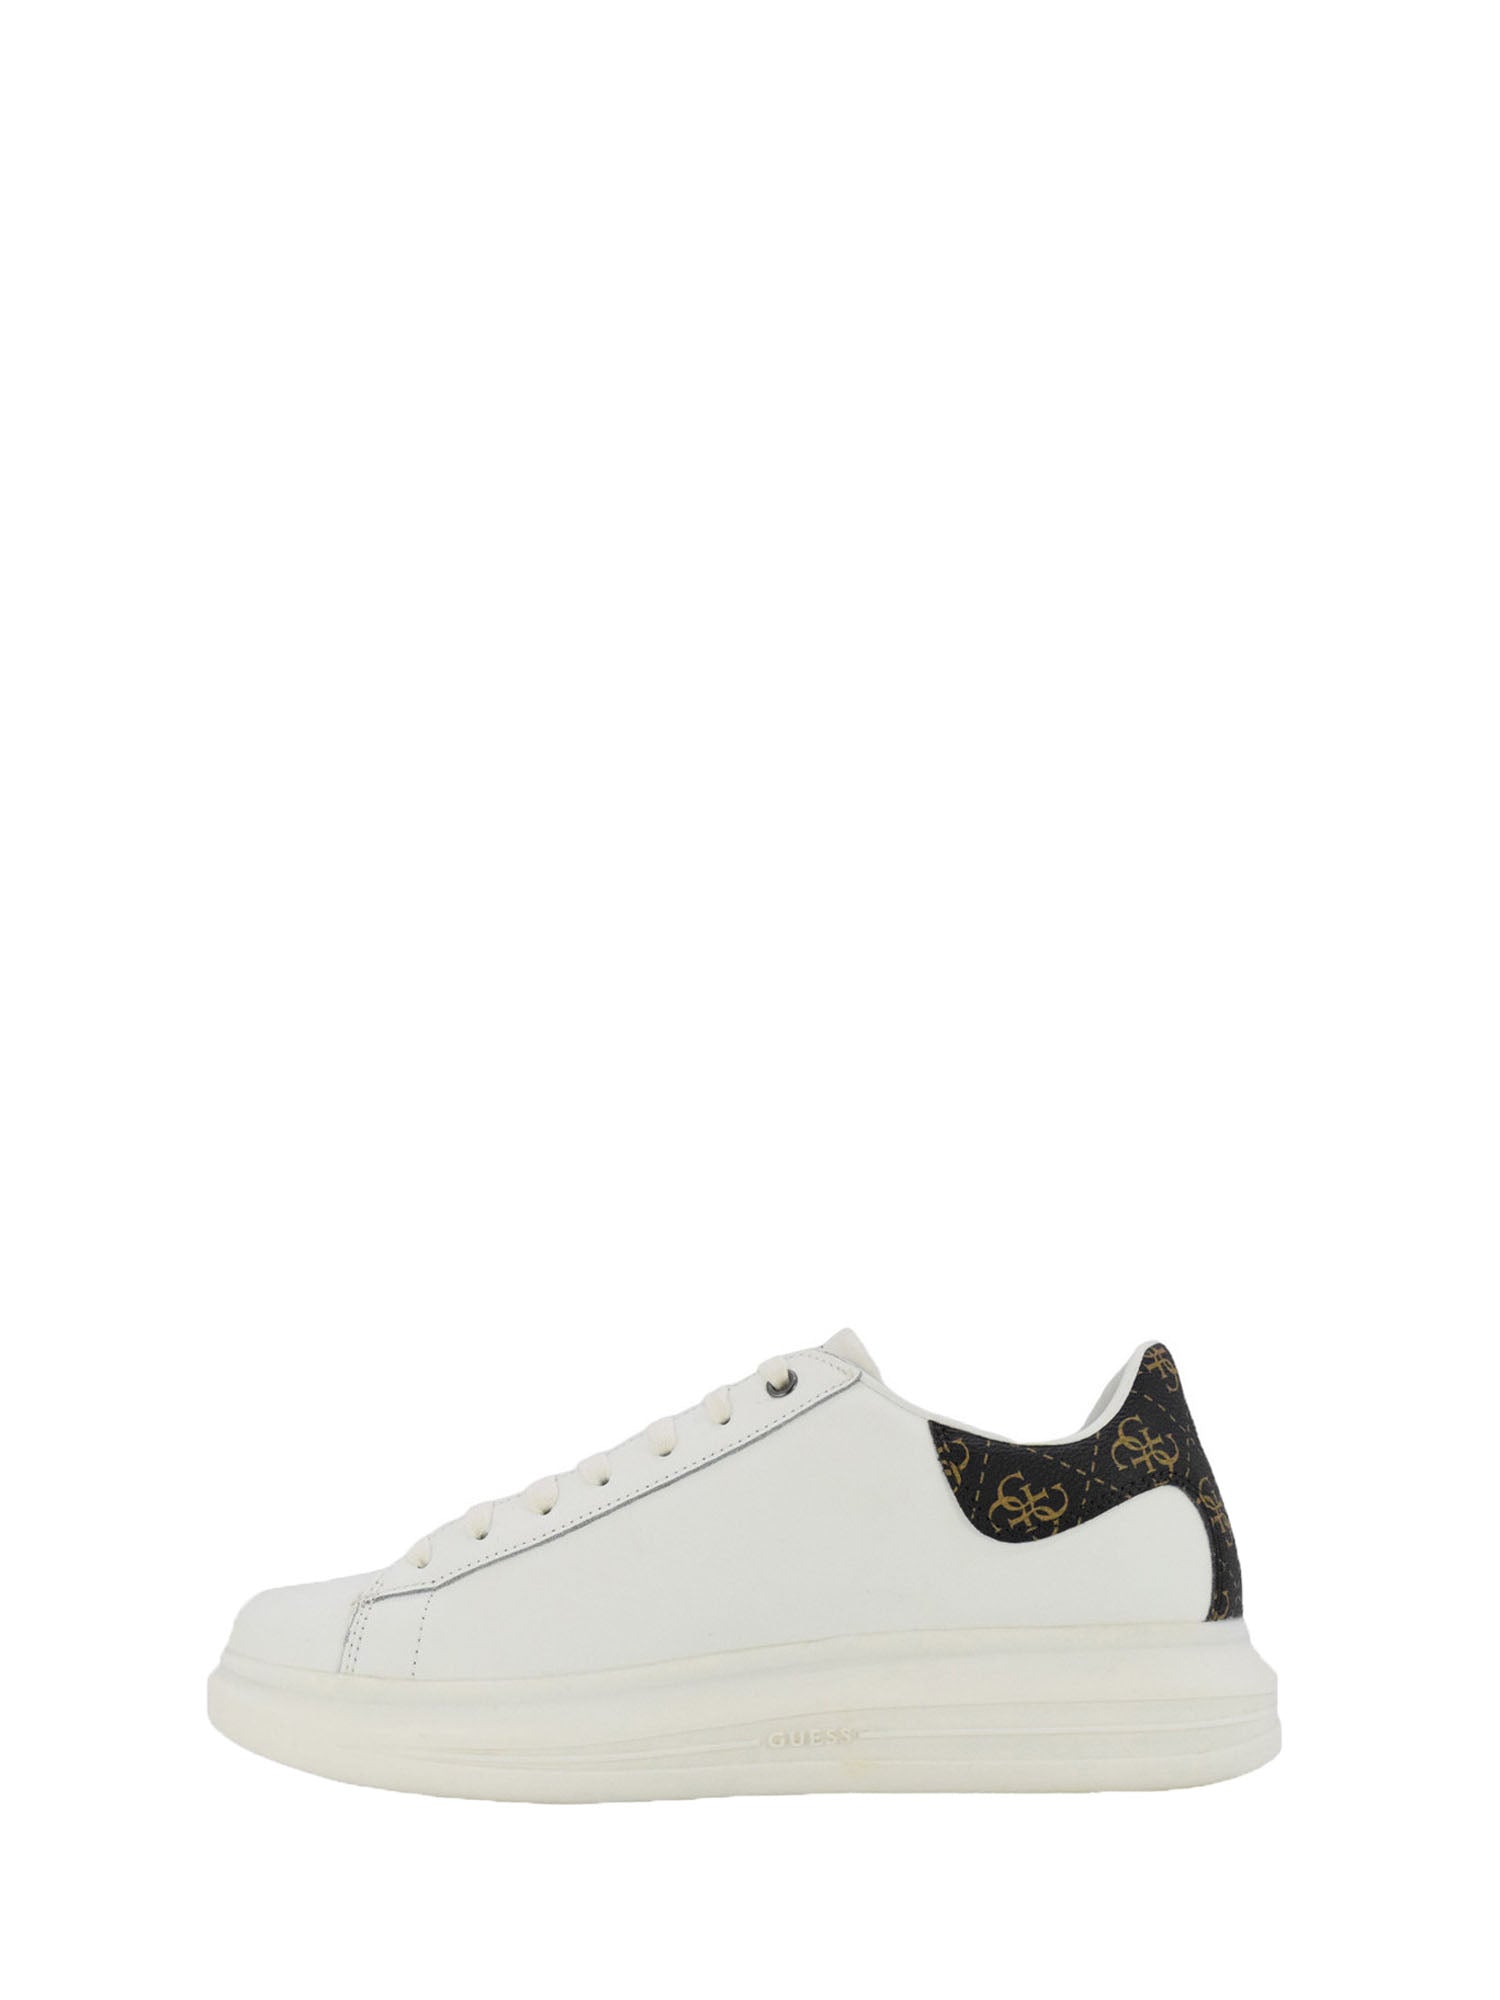 GUESS JEANS SHOES SNEAKERS SALERNO BIANCO - MARRONE